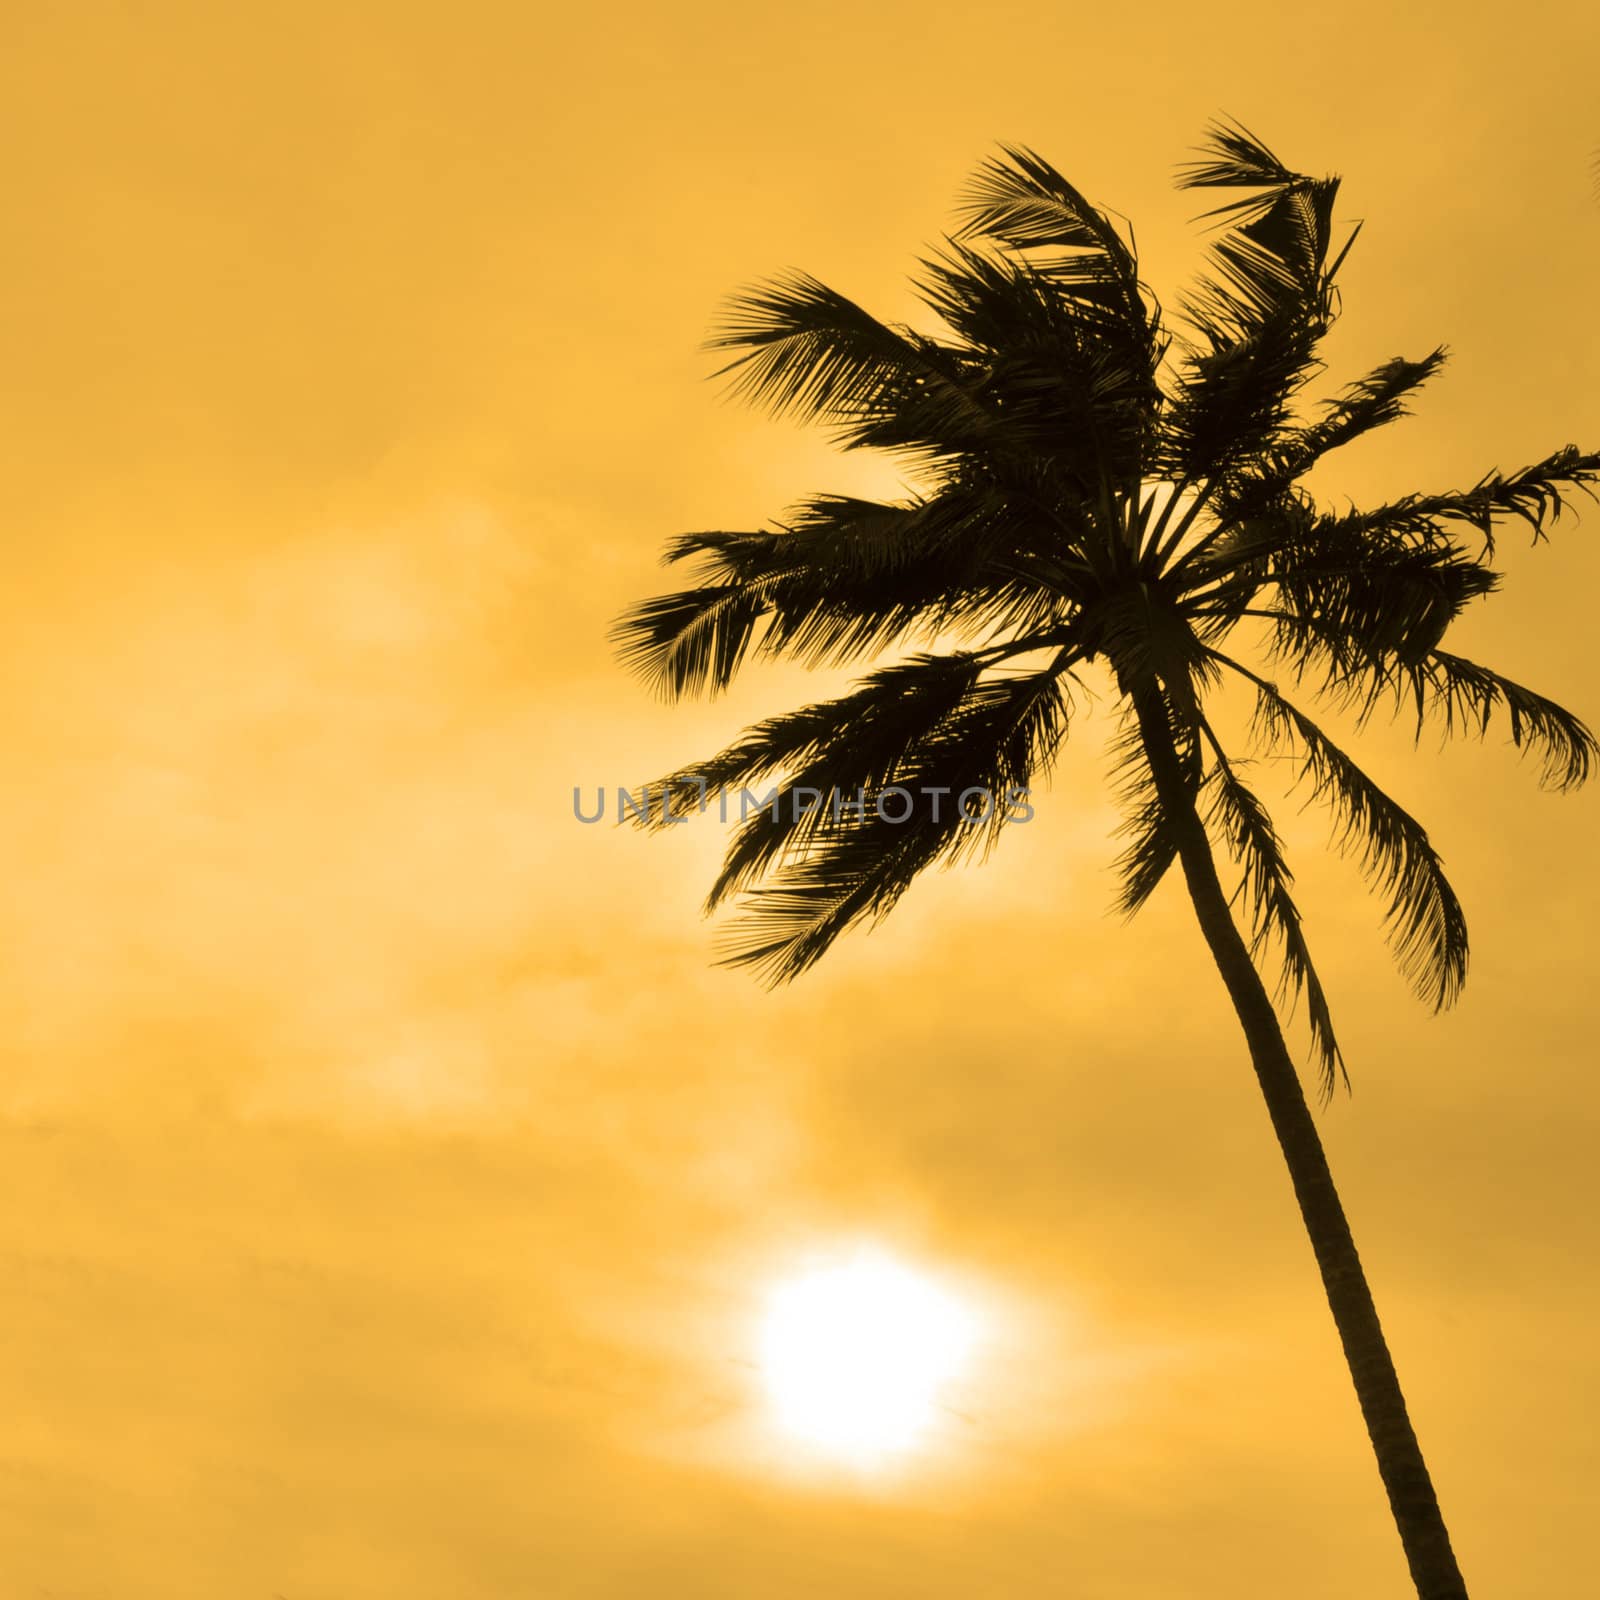 Silhouette of a Palm tree against the sun by kdreams02